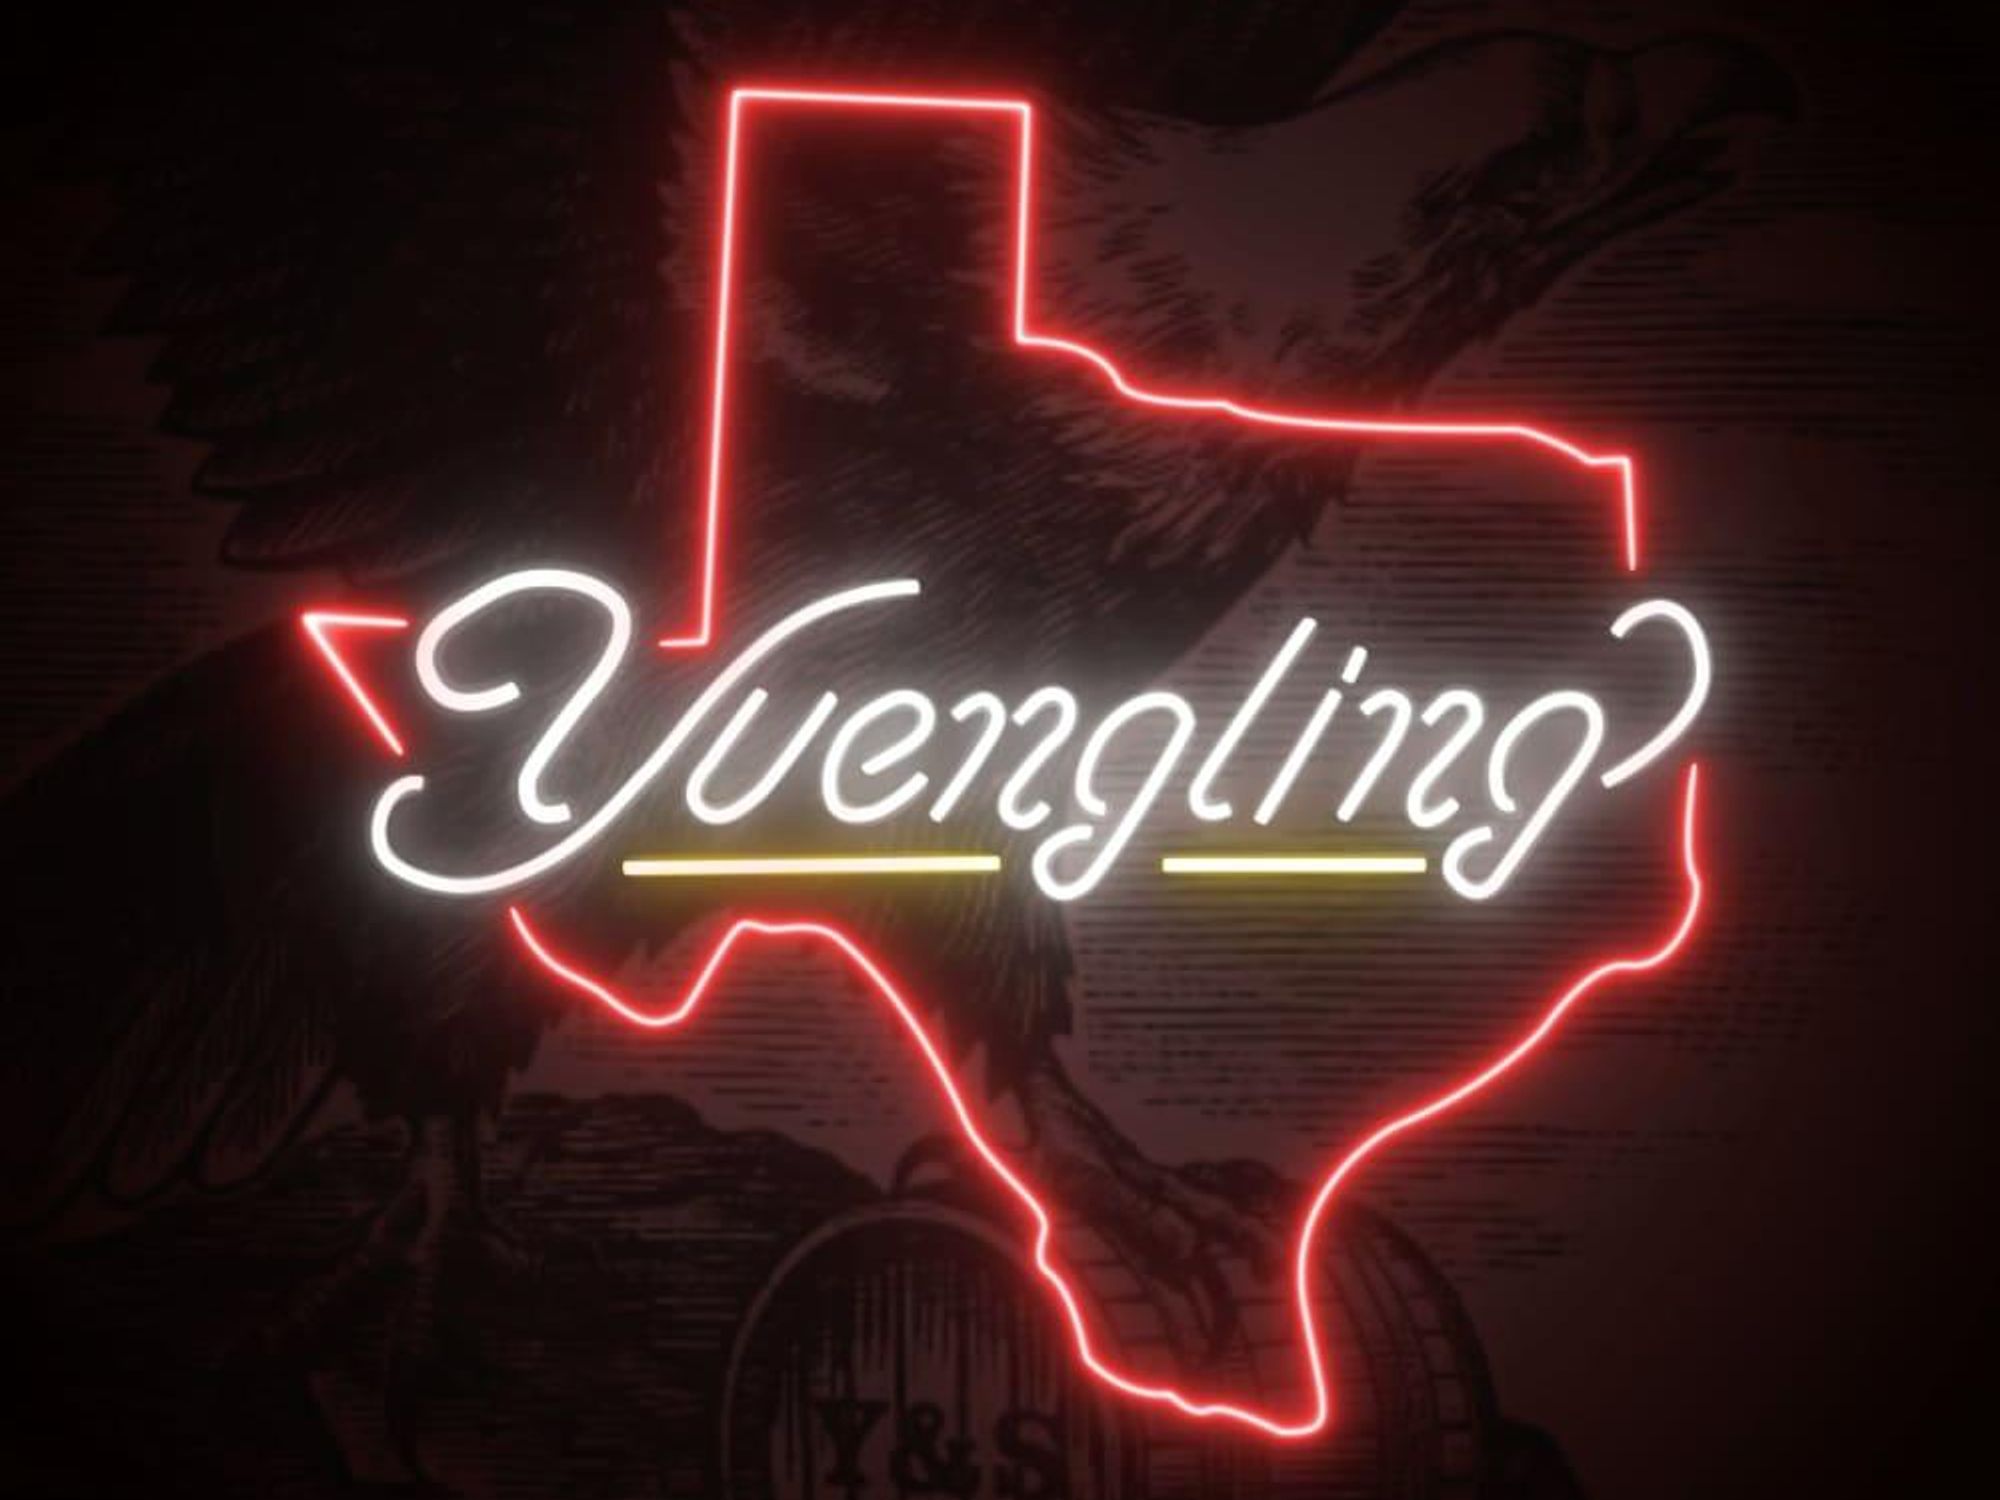 Yuengling Texas beer sign